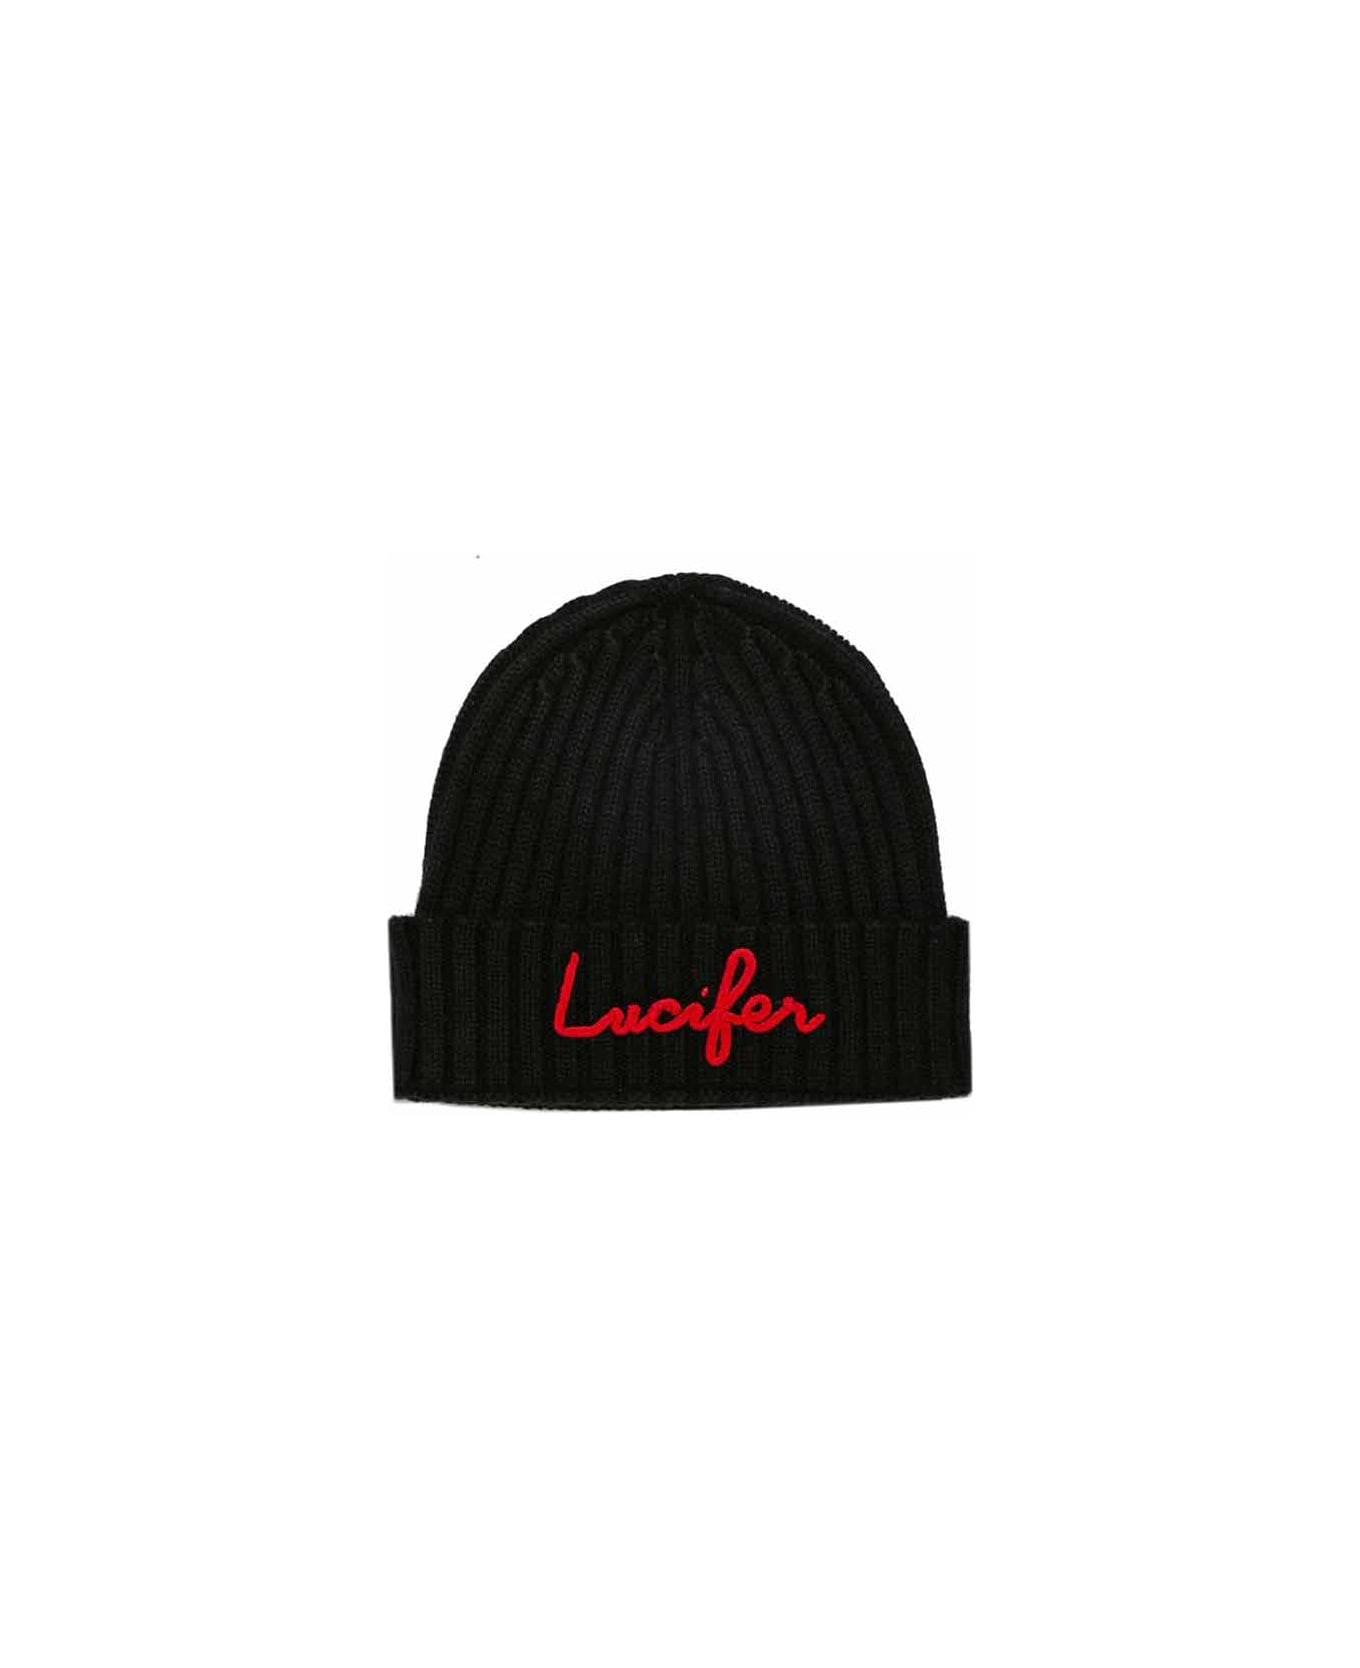 MC2 Saint Barth Blended Cashmere Hat With Lucifer Embroidery - BLACK